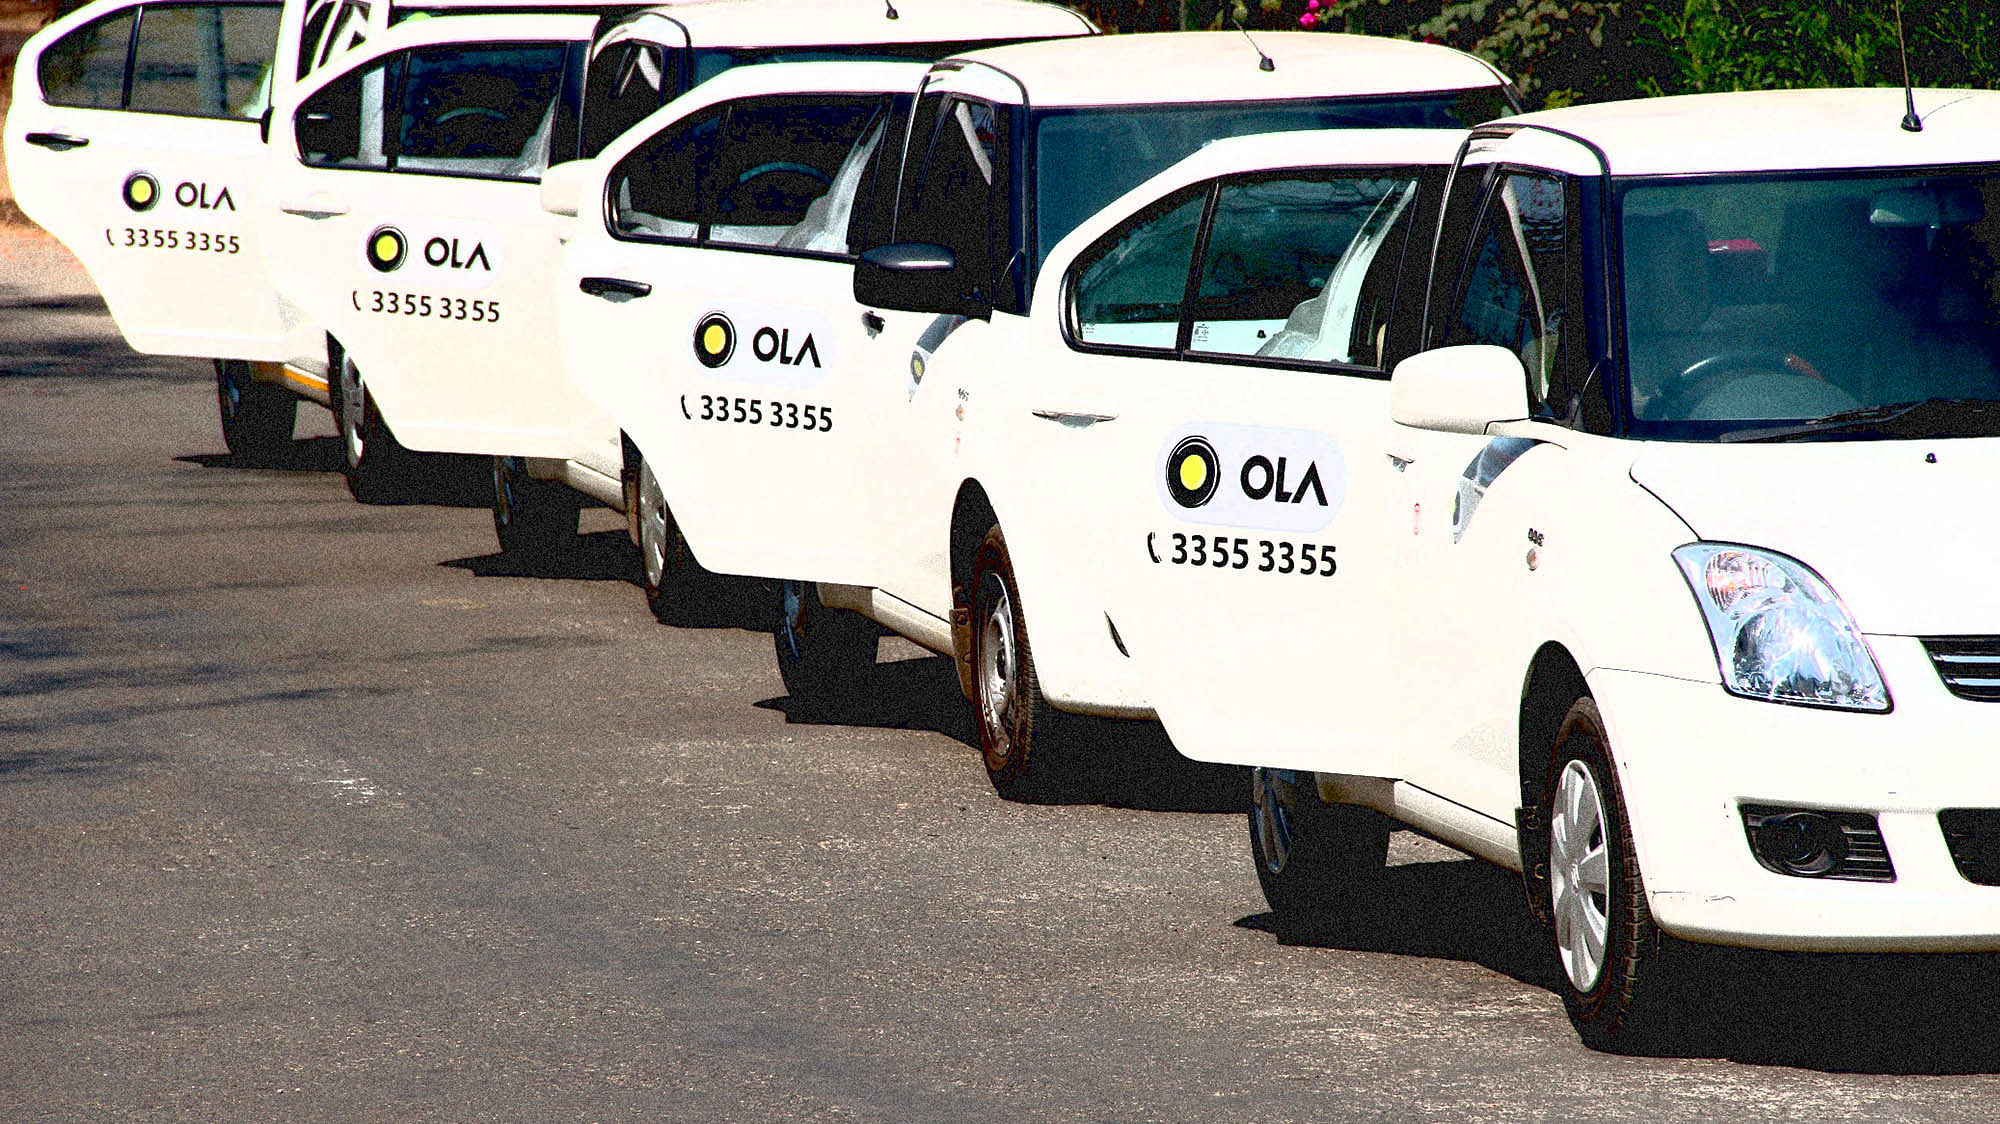 Ola denies reports of selling stake to Uber, looks to grow further. (Photo: Reuters)